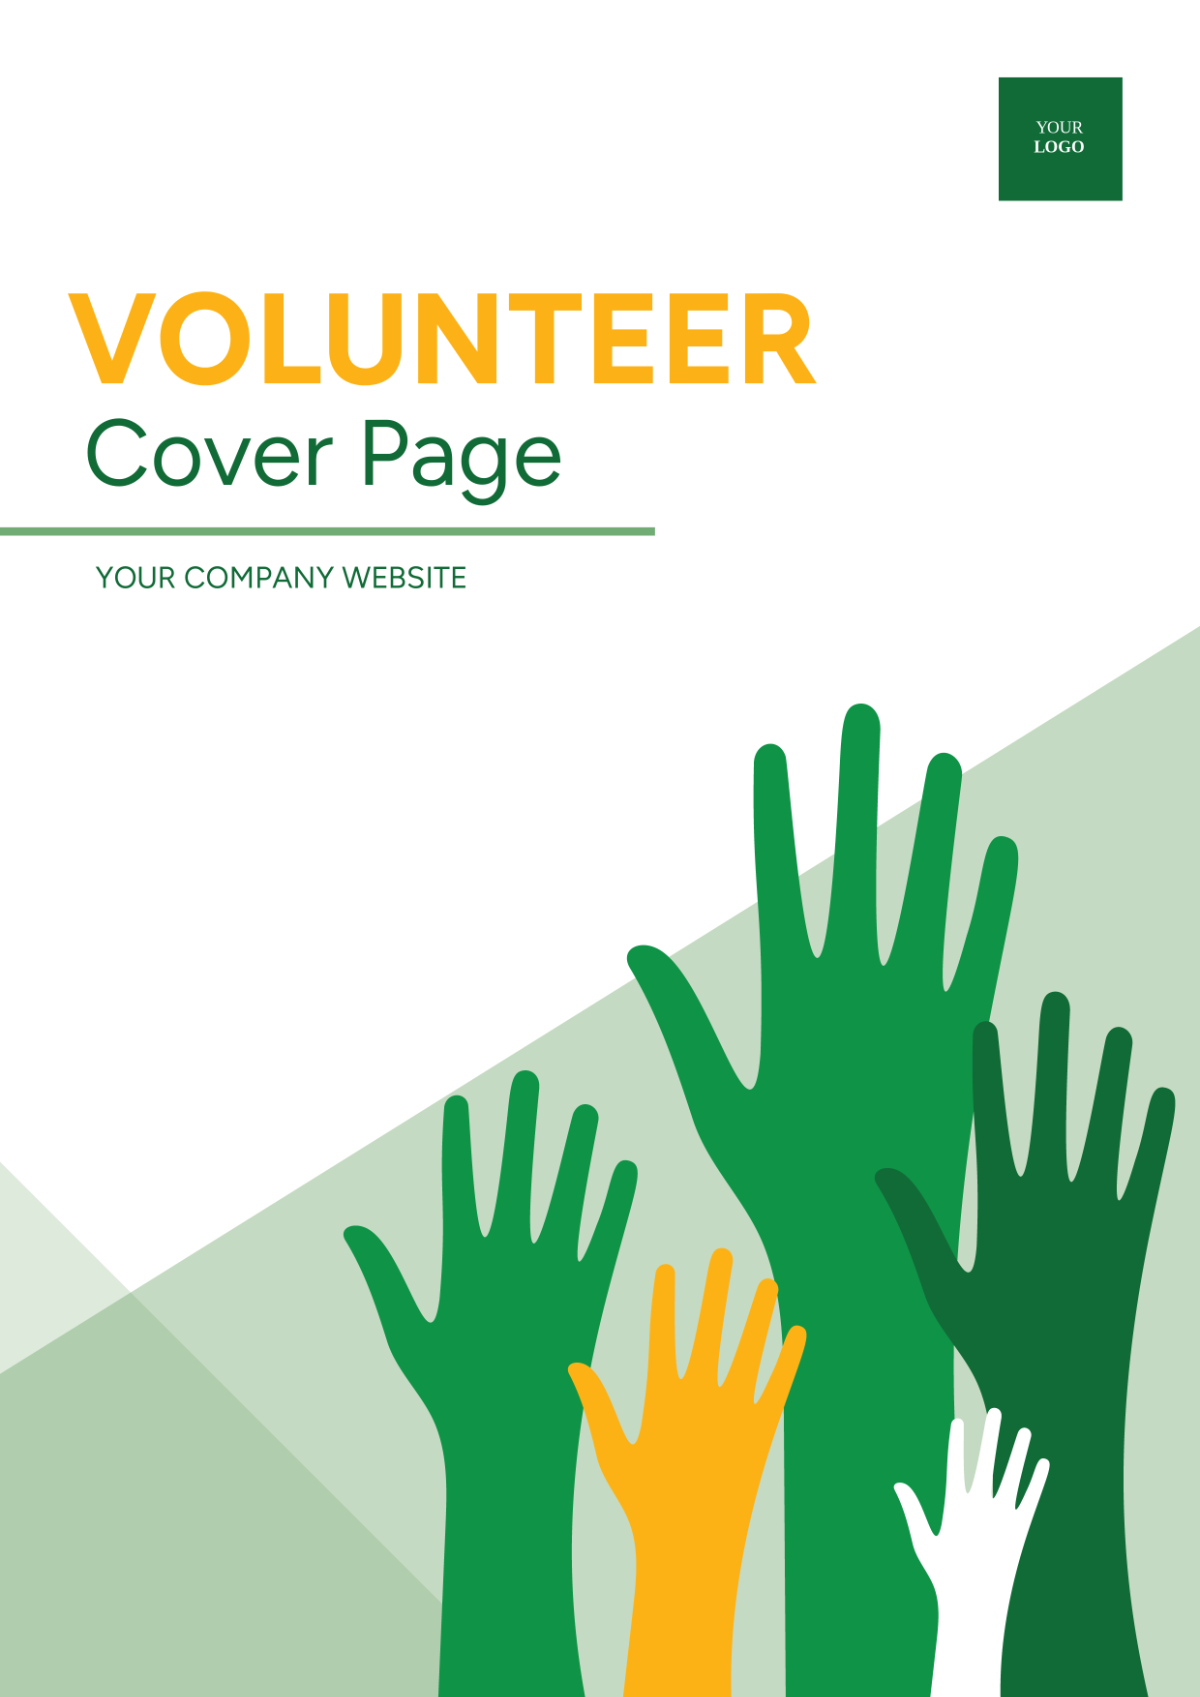 Volunteer Cover Page